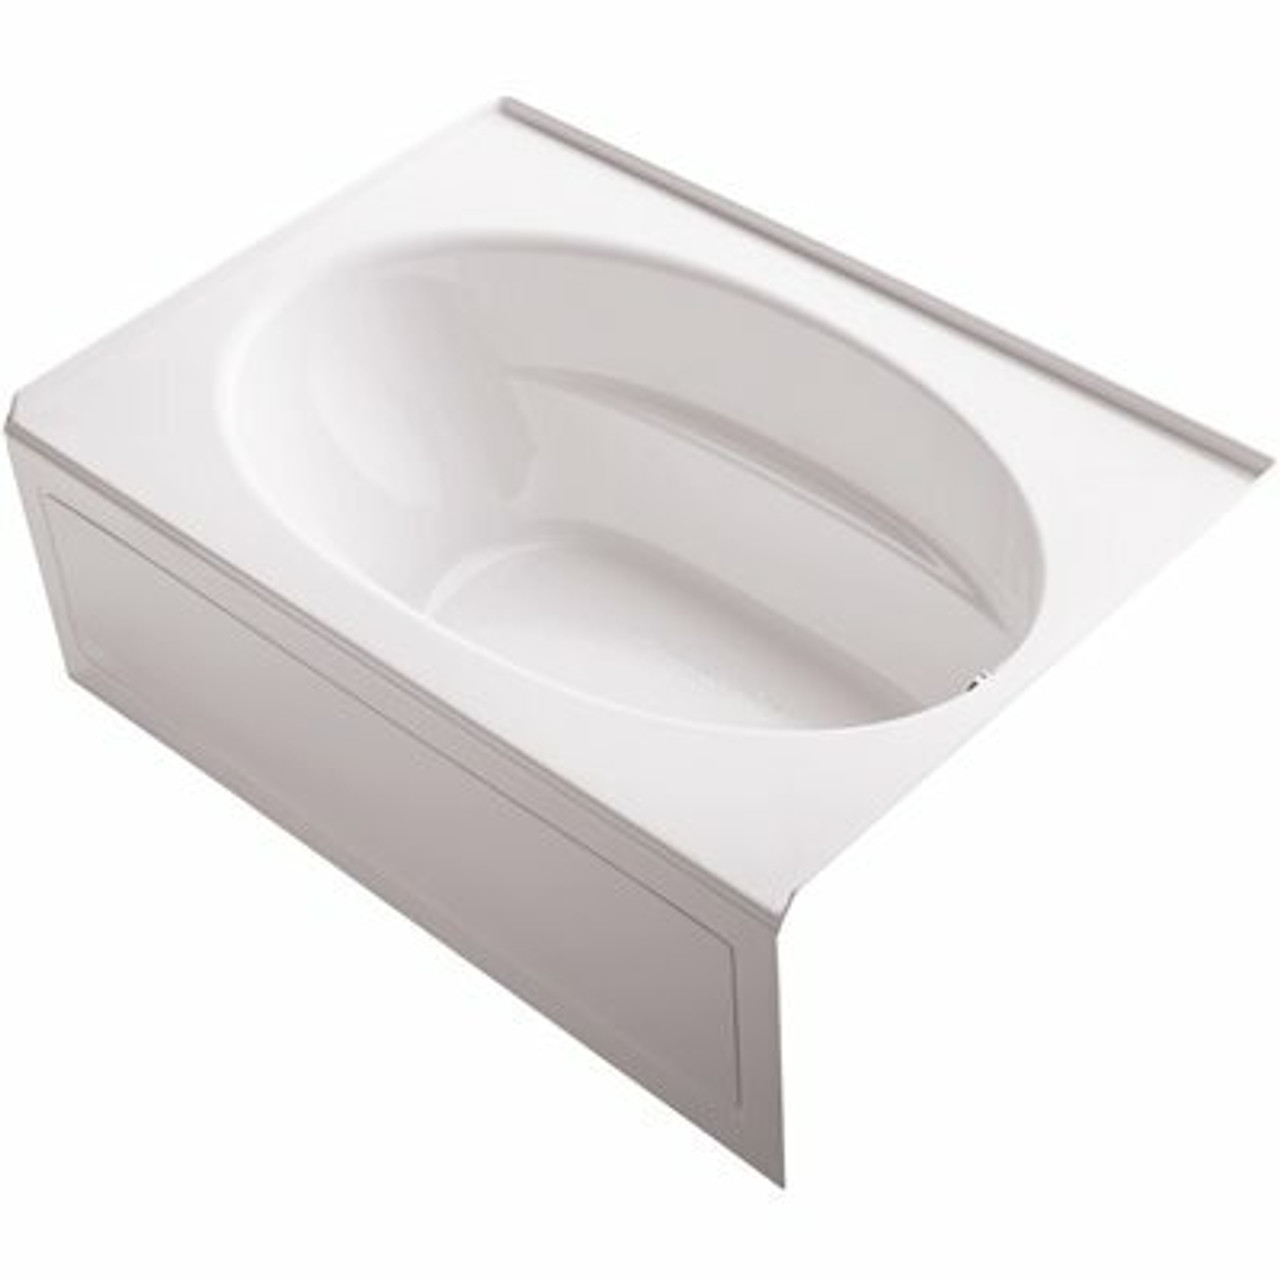 Kohler Windward 60 In. X 42 In. Acrylic Alcove Bathtub With Integral Apron And Right-Hand Drain In White